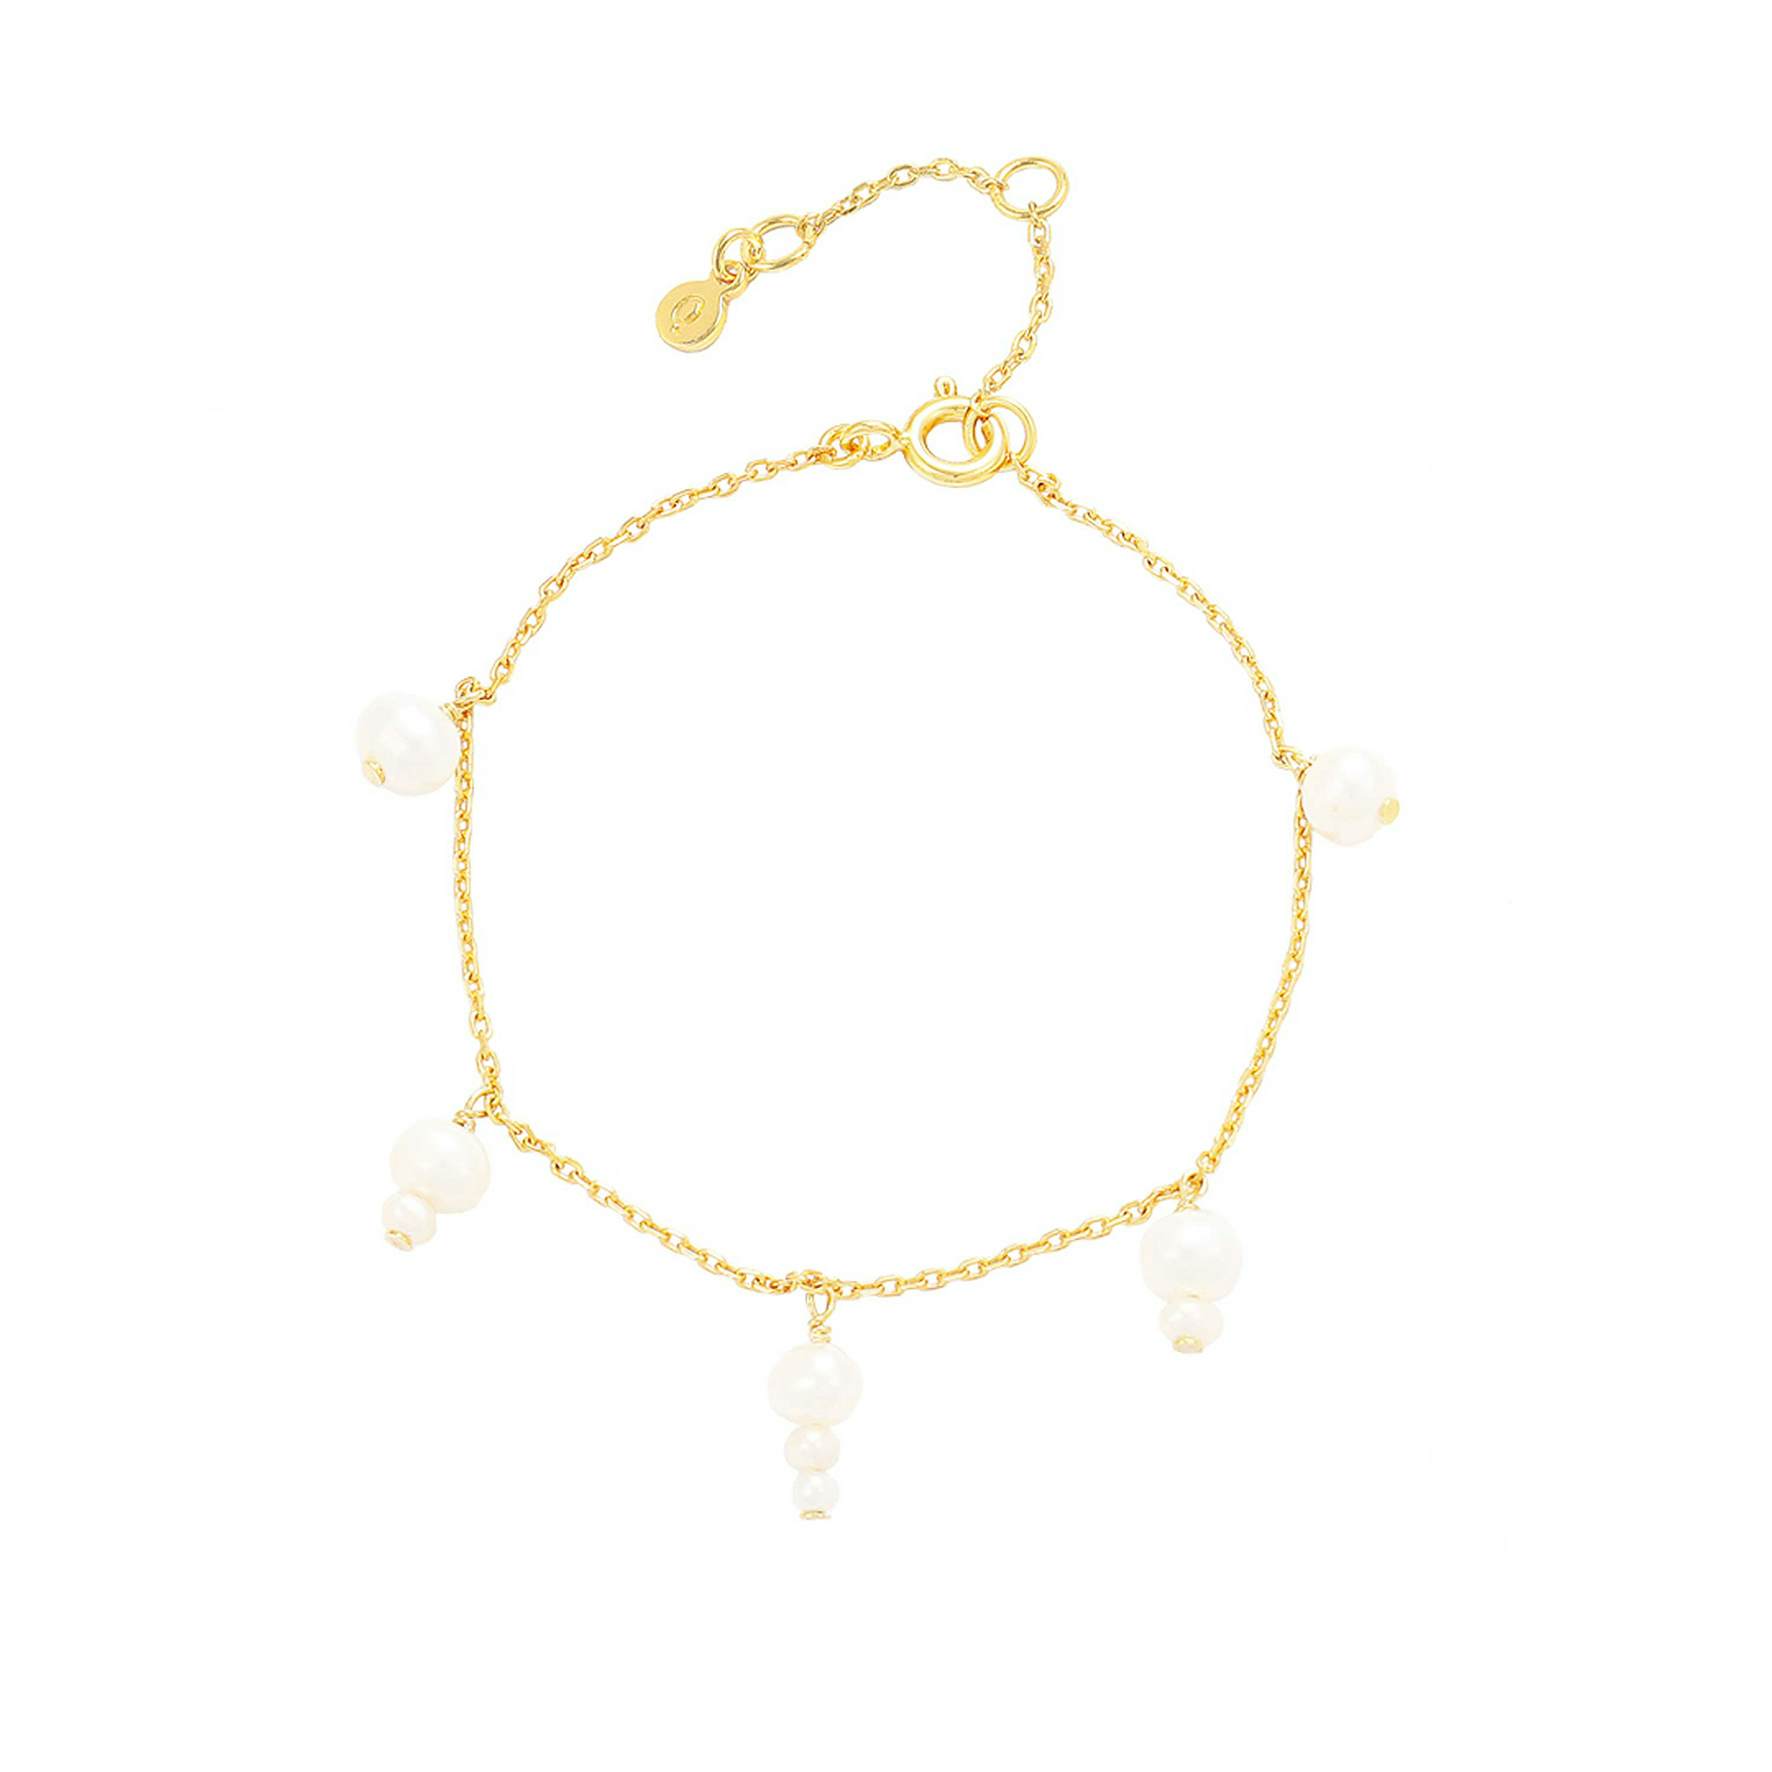 Esther Bracelet from Hultquist Copenhagen in Goldplated-Silver Sterling 925